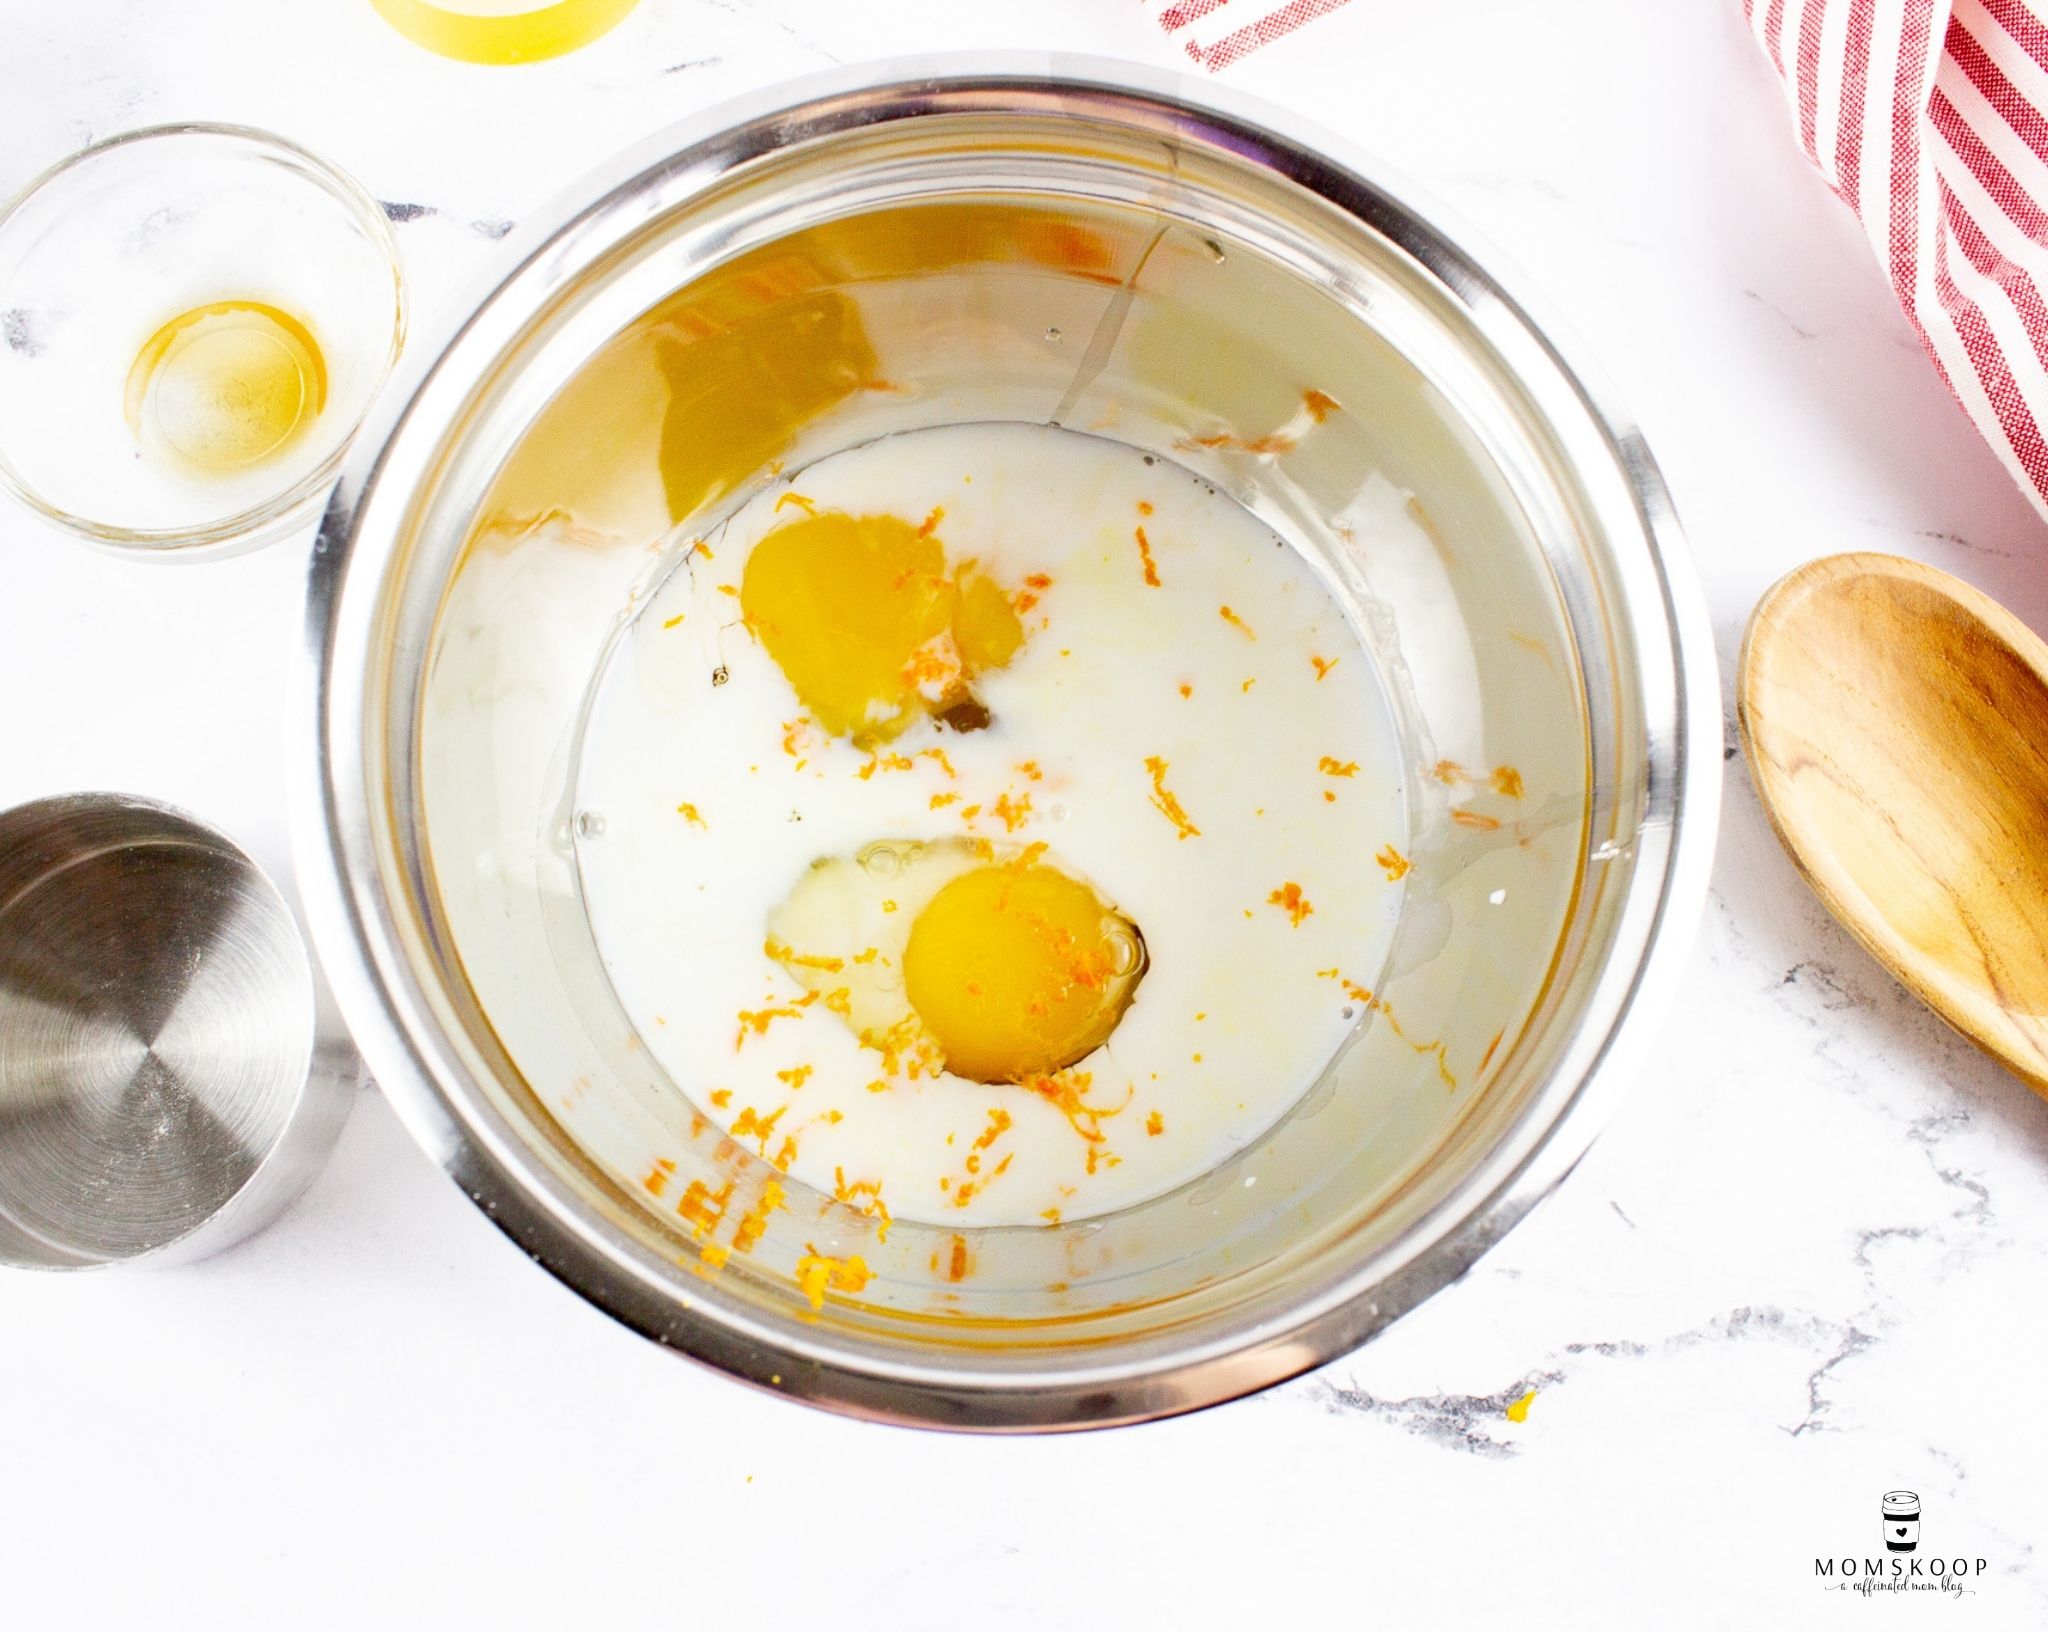 Milk, eggs, and orange zest in a stainless steel bowl